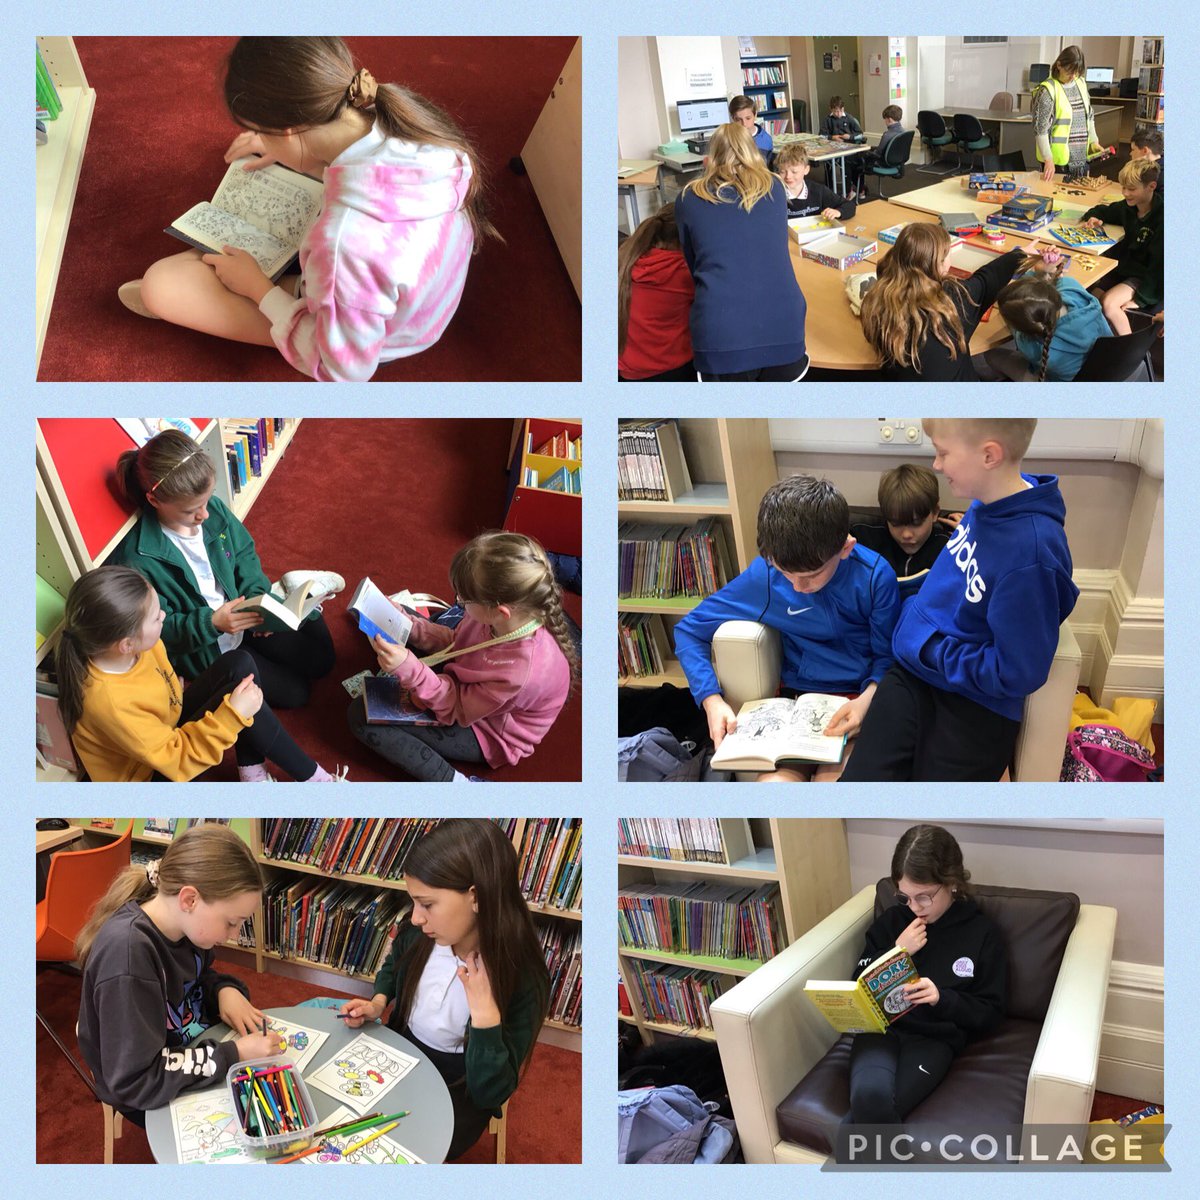 We love our local library visits - it's a great way to promote reading for pleasure @EAS_LLCEnglish @EAS_Equity